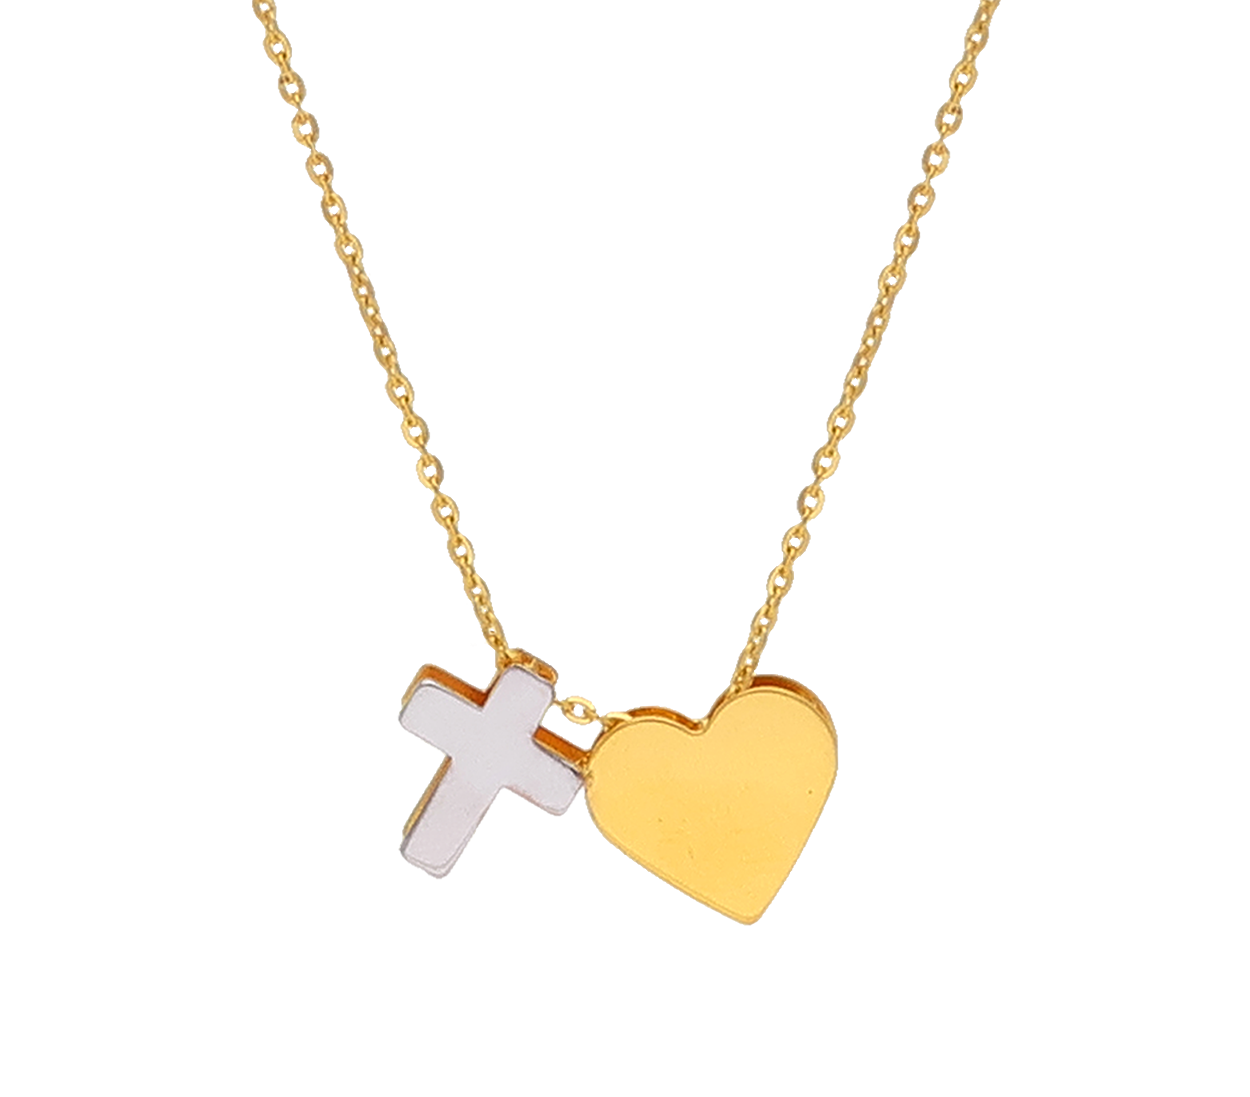 2pcs Stainless Steel Men's Women's His Hers Cross Pendant Necklace Chain  Gift | eBay